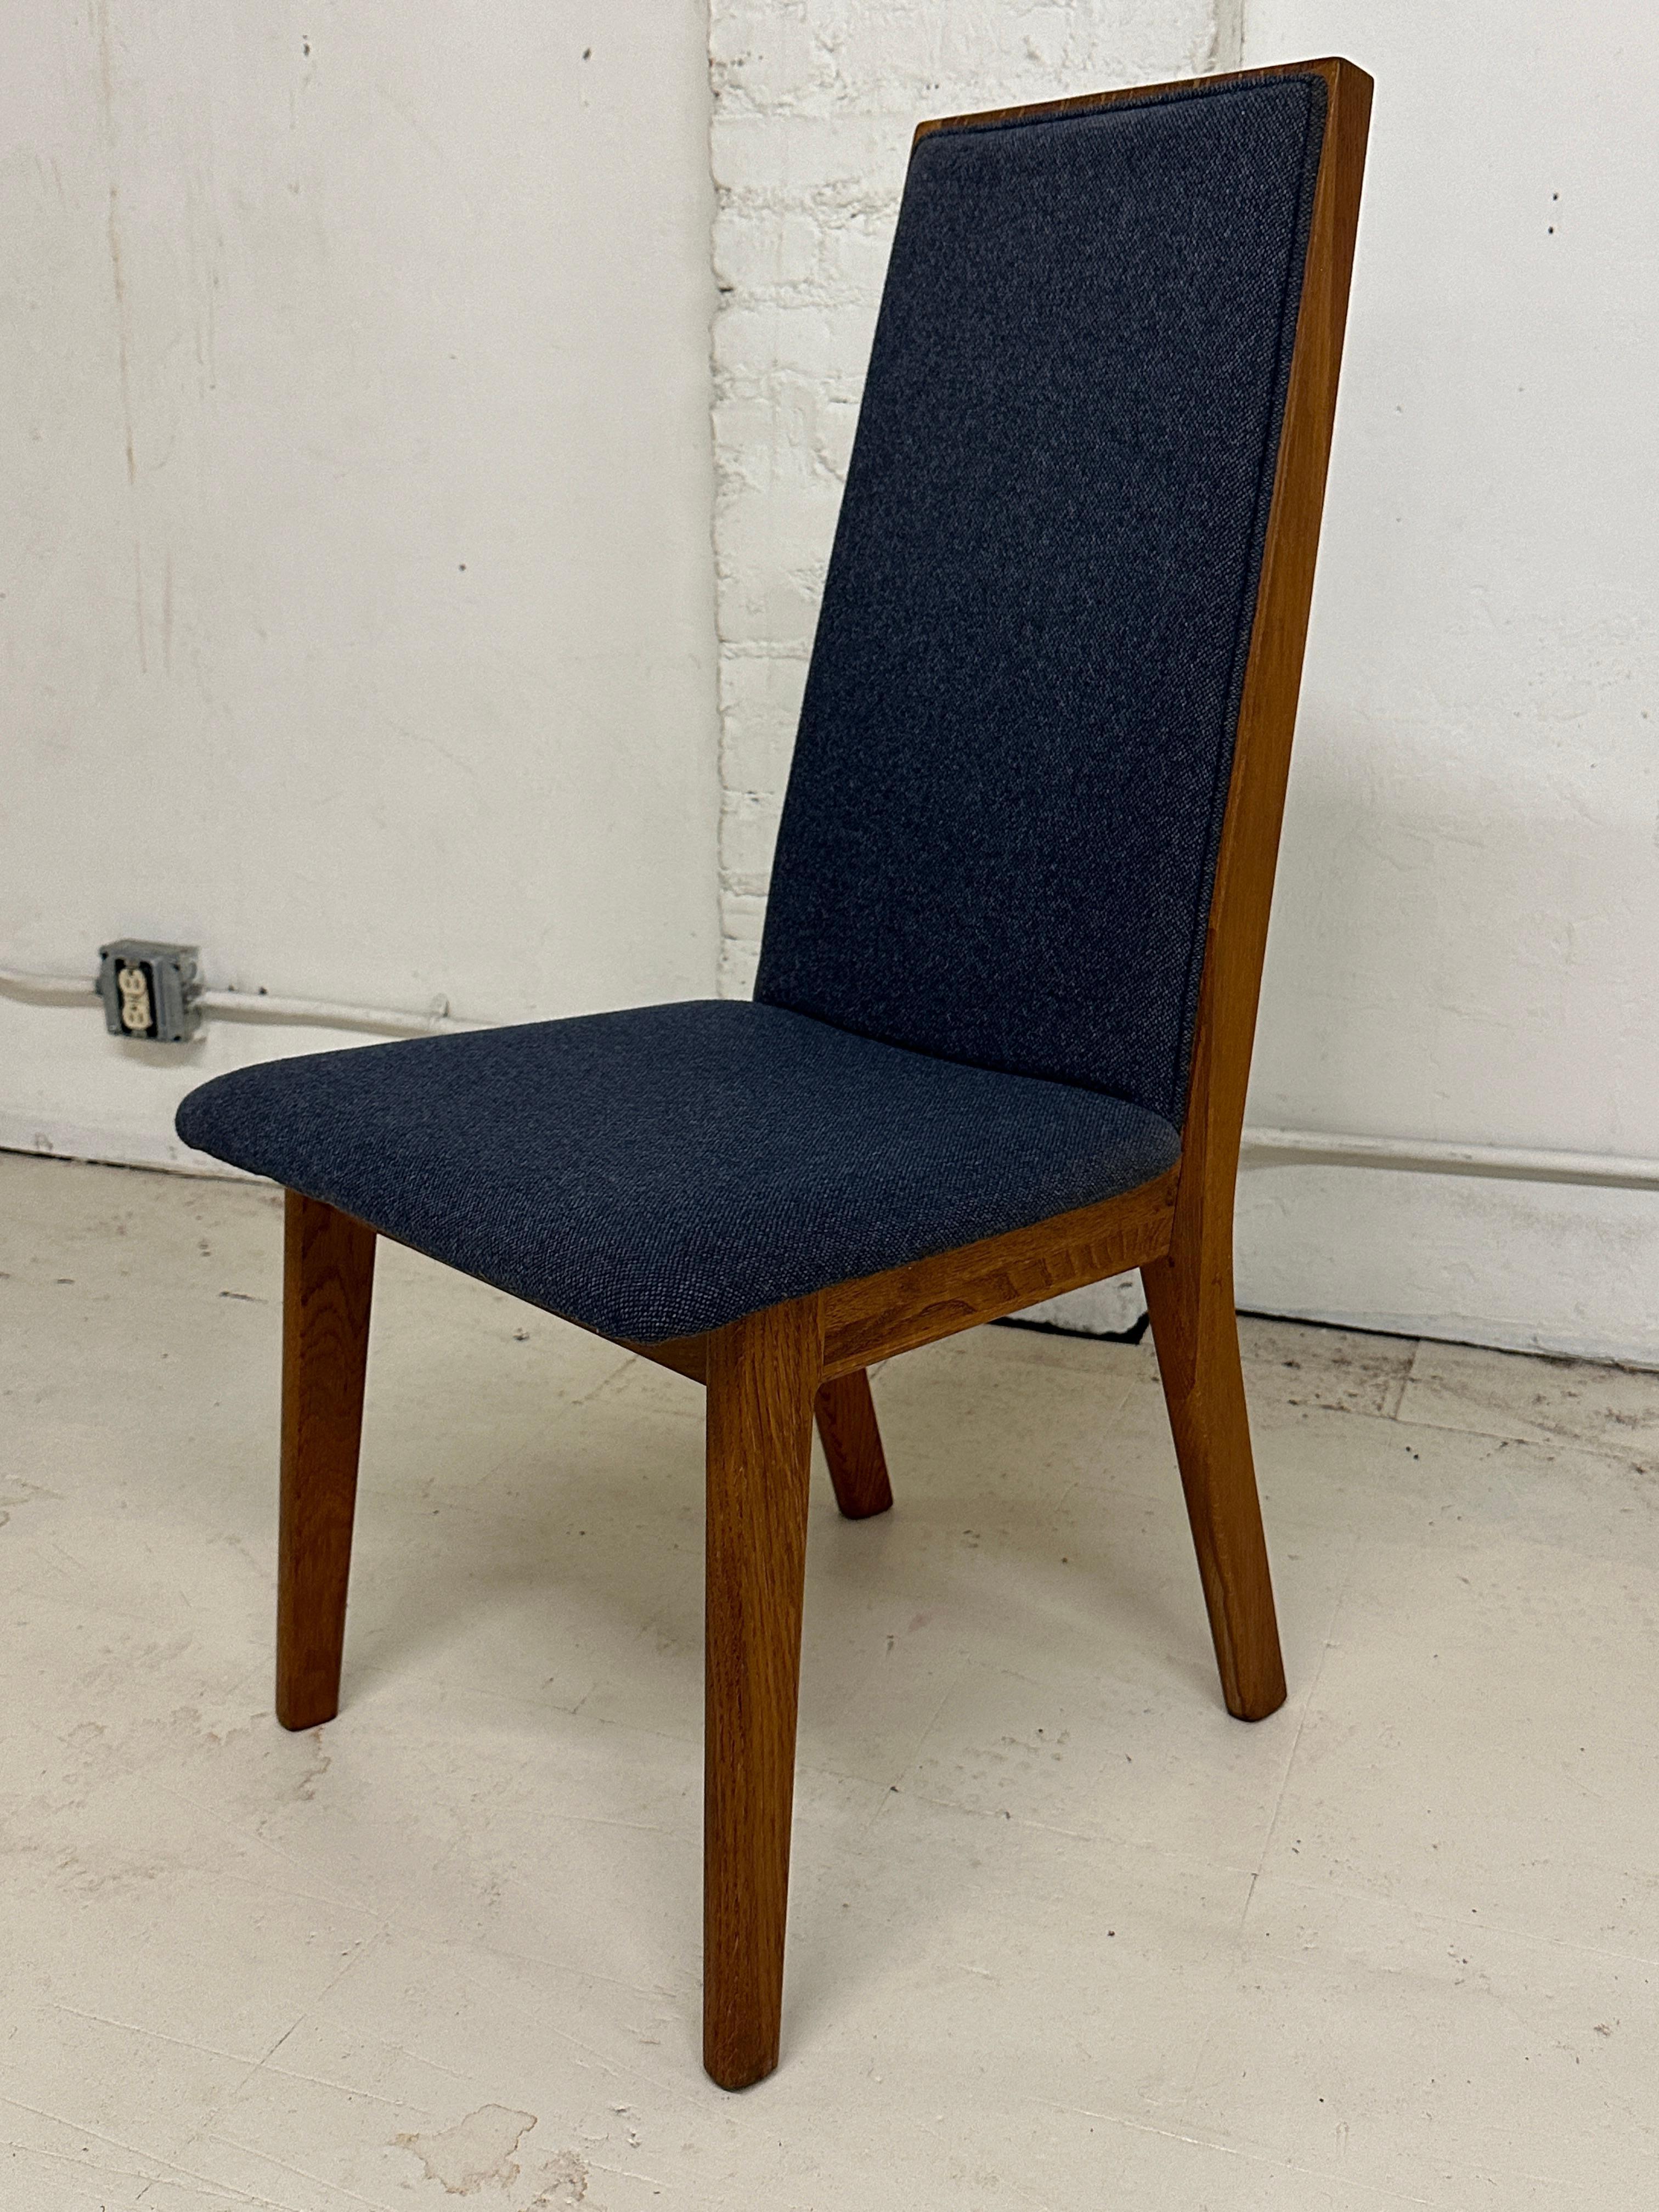 This set of six Danish Dining Room Chairs was crafted in the 1970s by the Danish manufacturer Dyrlund. They embody the essence of Danish mid-century modern aesthetics. 
Dyrlund, a trailblazer in the mid-century modern movement since its founding in